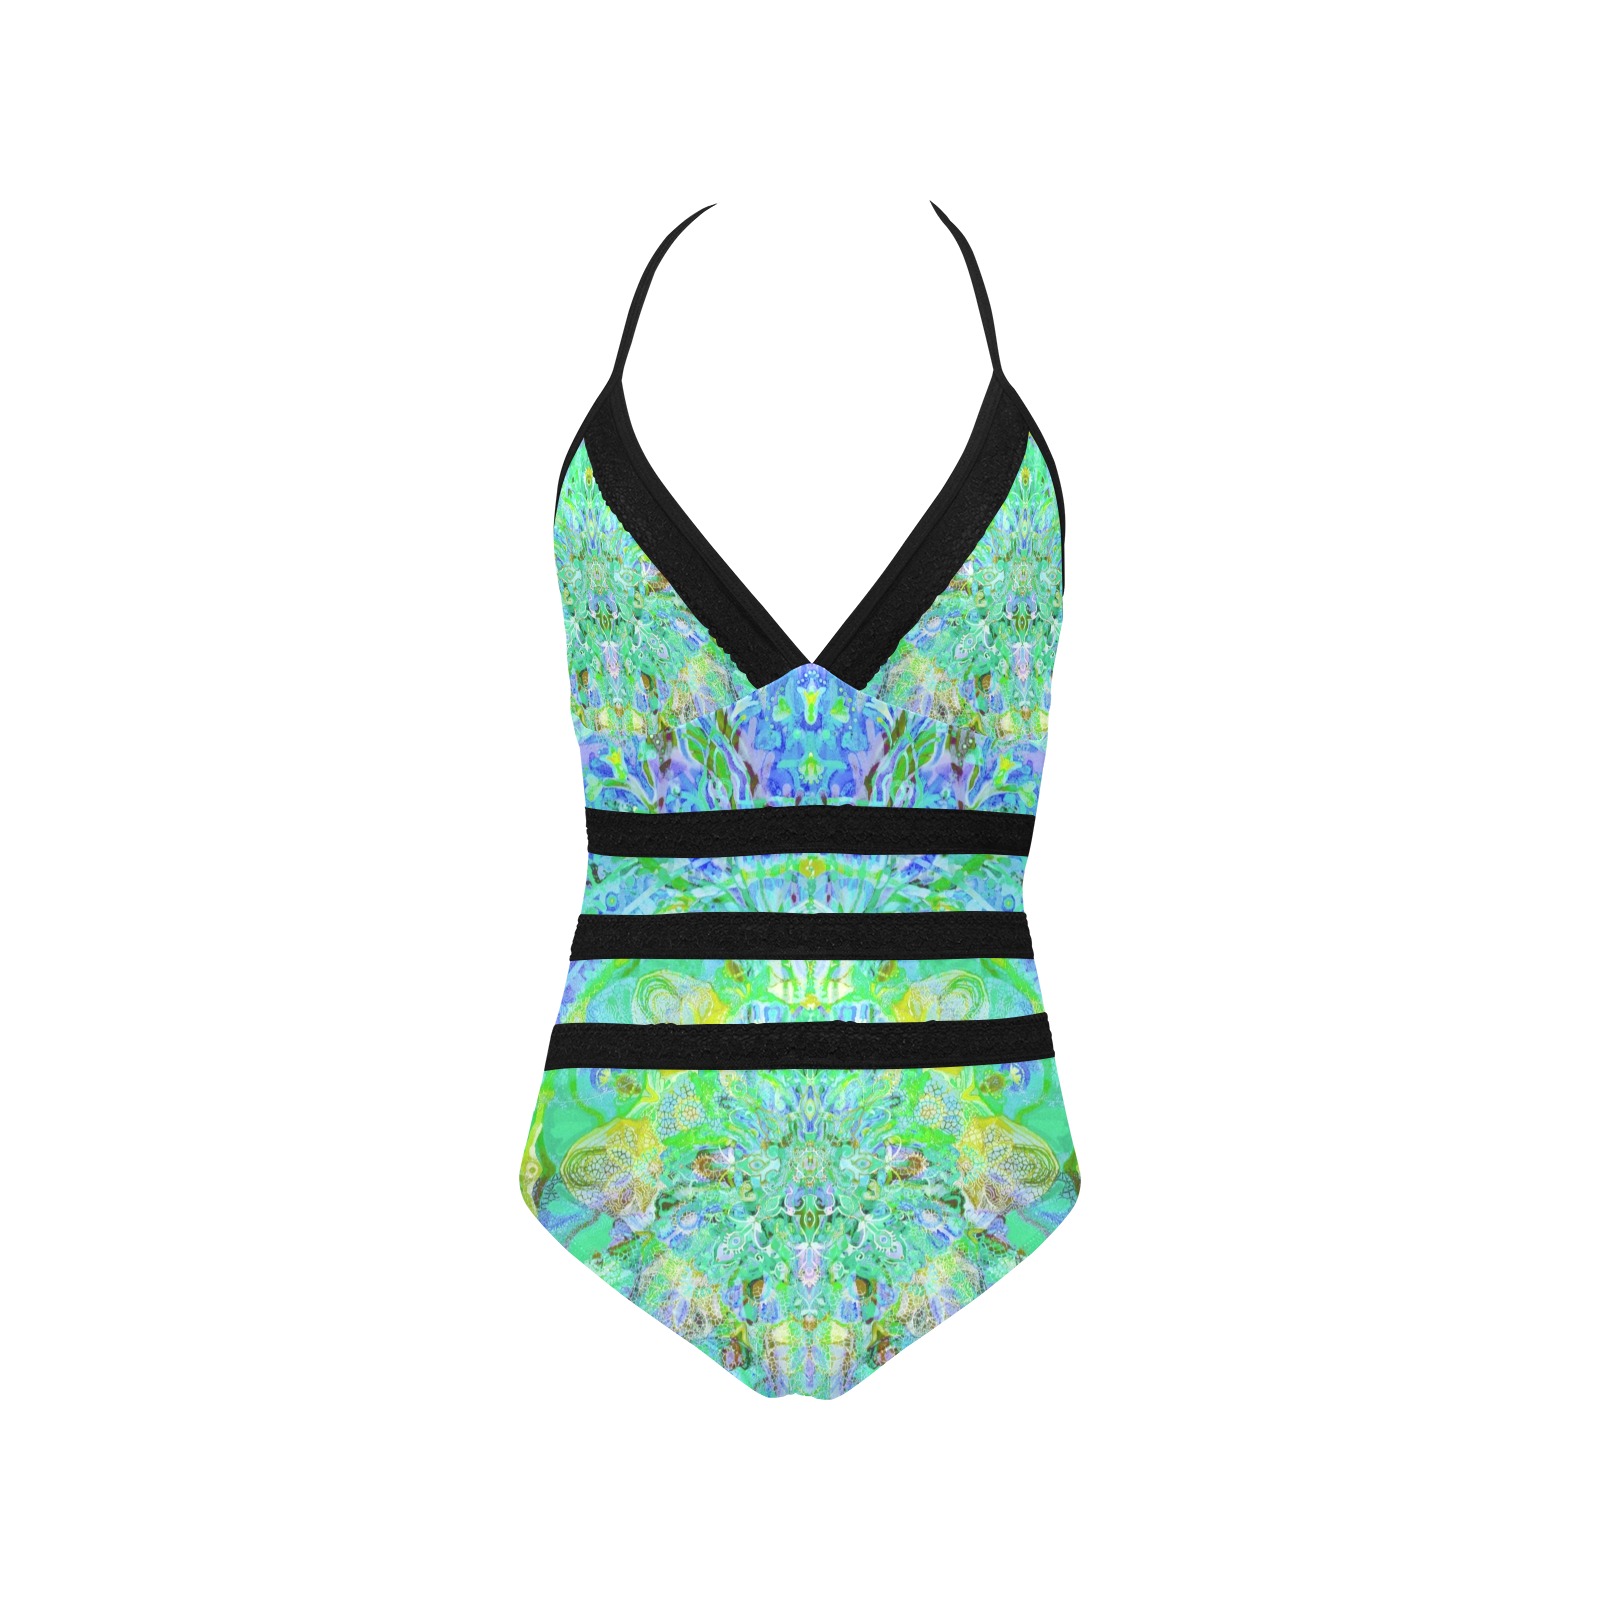 New Lace Band Embossing Swimsuit (Model S15)